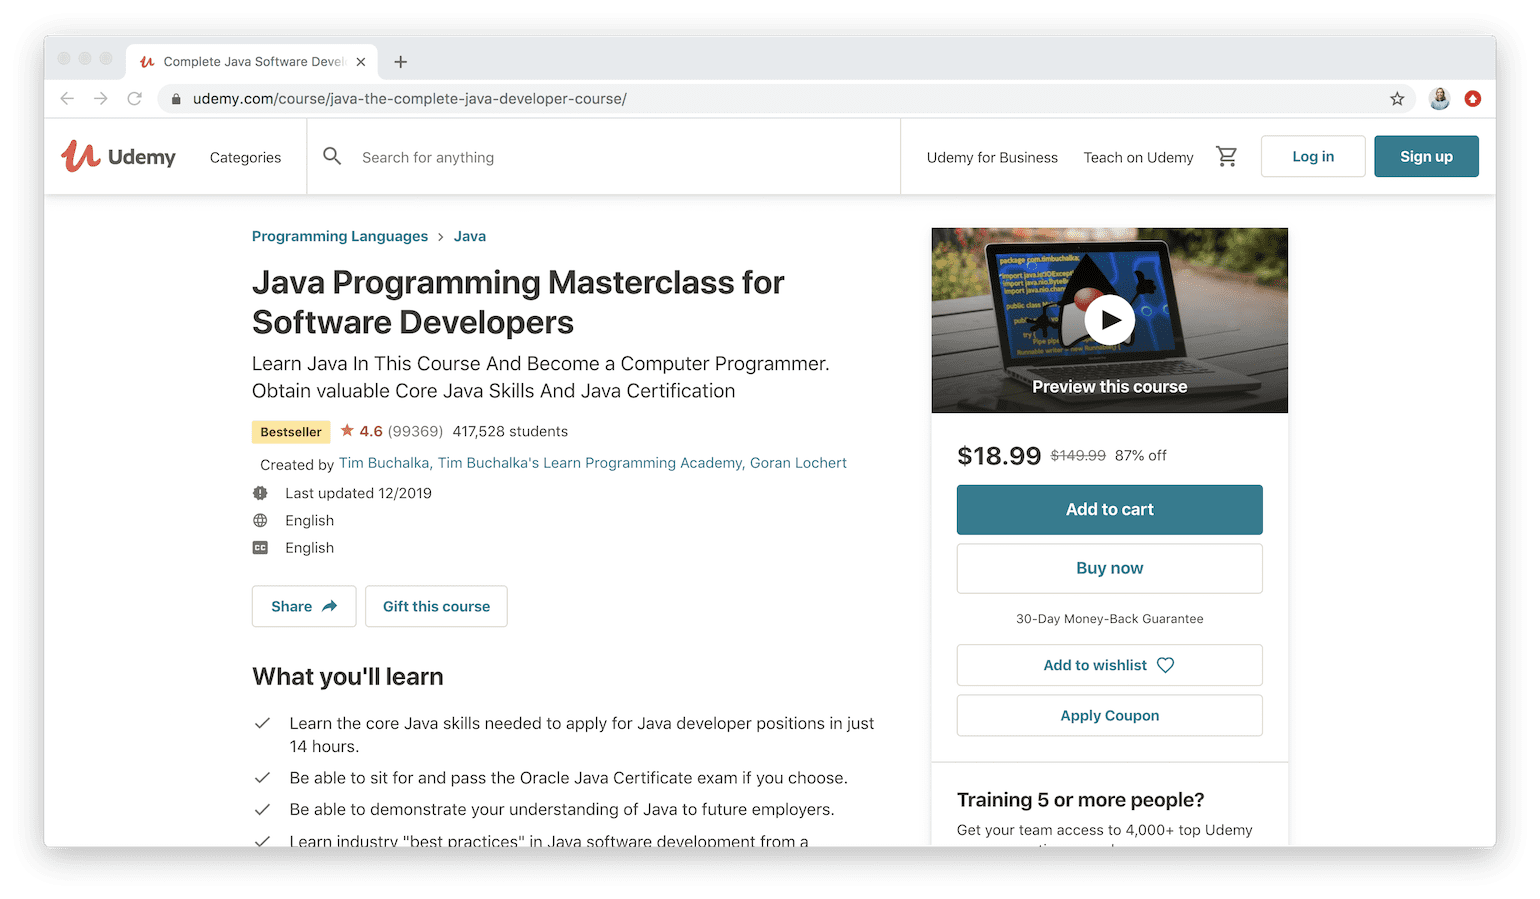 Java Programming Masterclass for Software Developers on Udemy